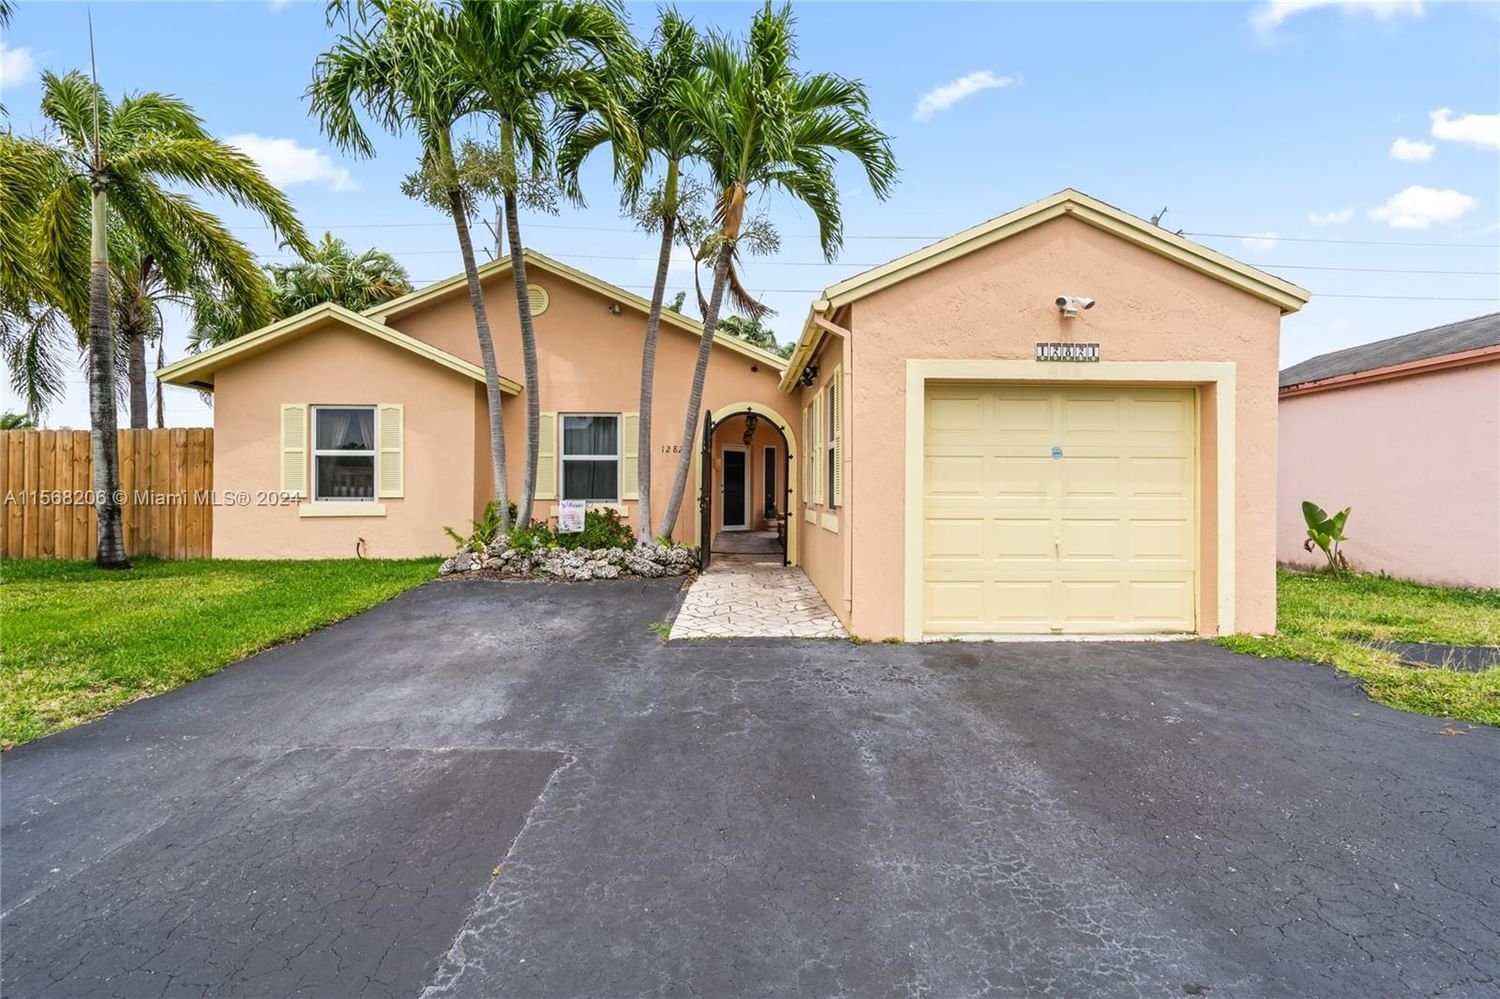 Real estate property located at 12821 248th Ter, Miami-Dade County, PRINCETONIAN BY THE PARK, Homestead, FL